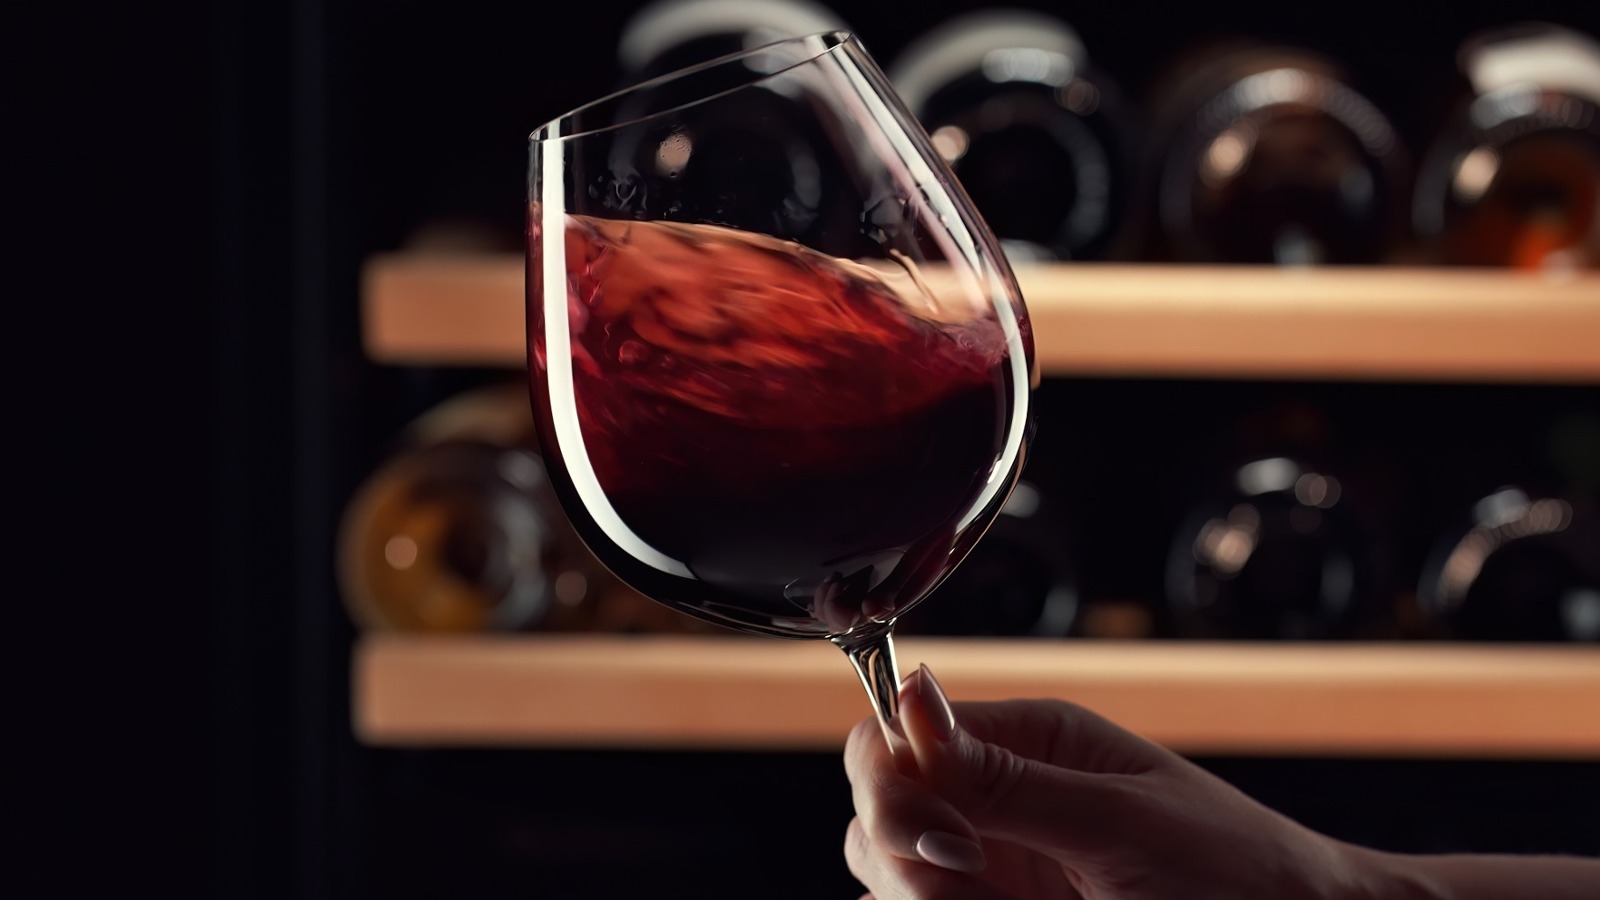 The 2-Ingredient Trick For Boosting The Taste Of Your Next Glass Of Wine